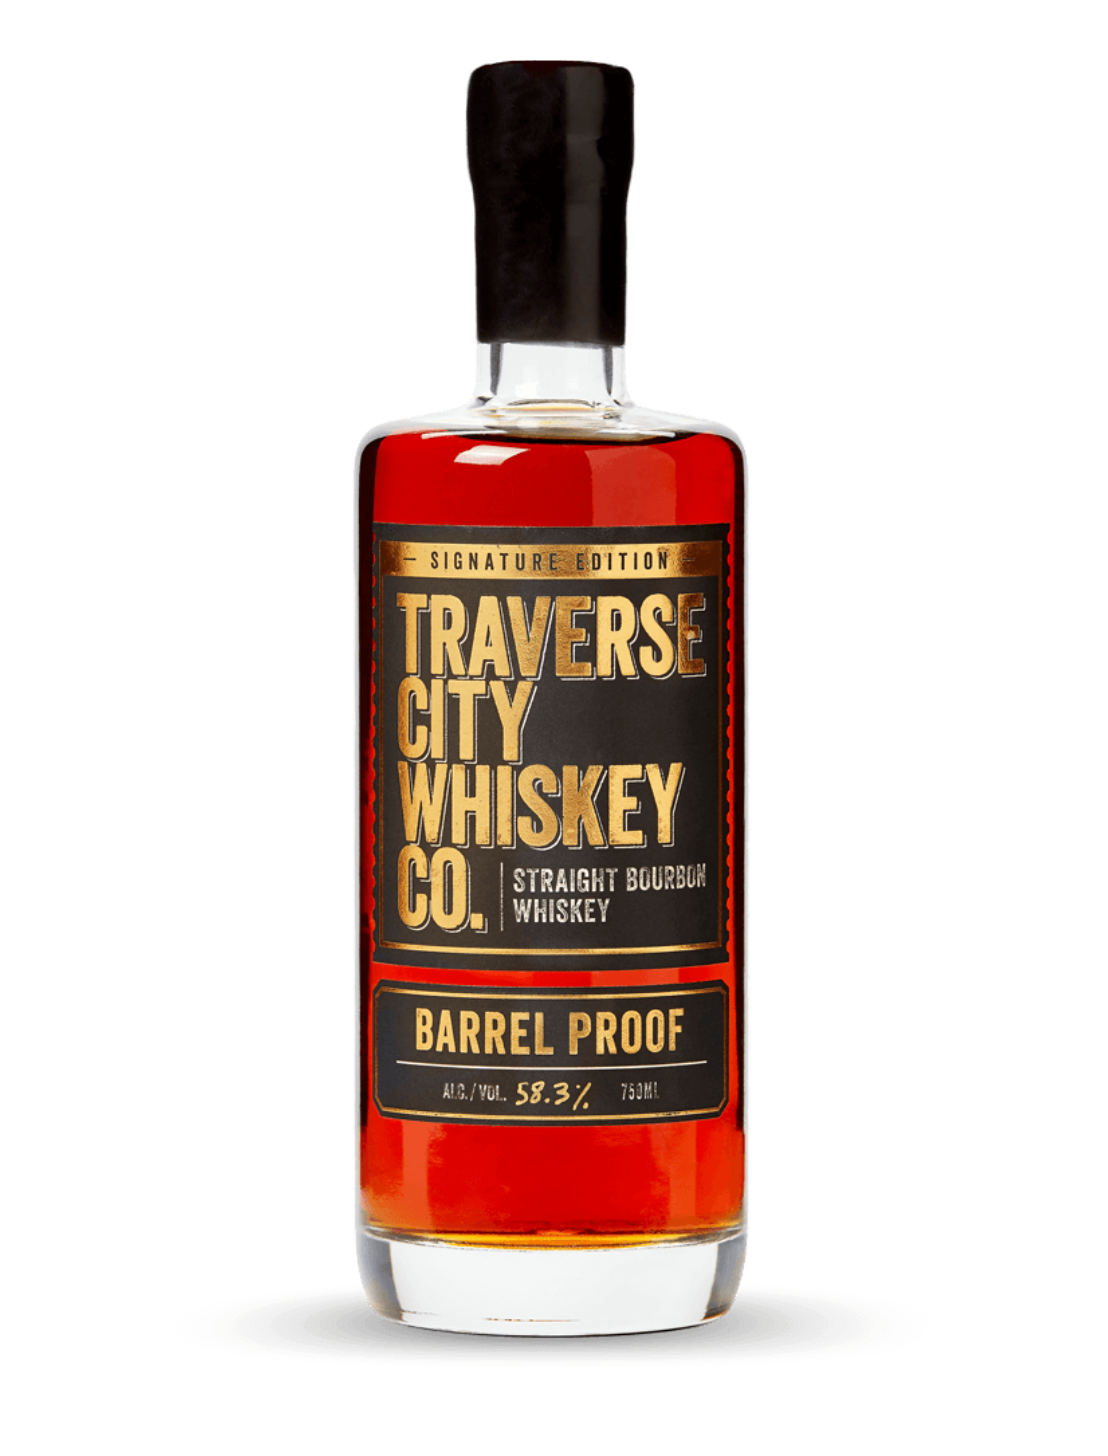 An elegant bottle of Traverse City Whiskey Barrel Proof Bourbon in front of a plain white background